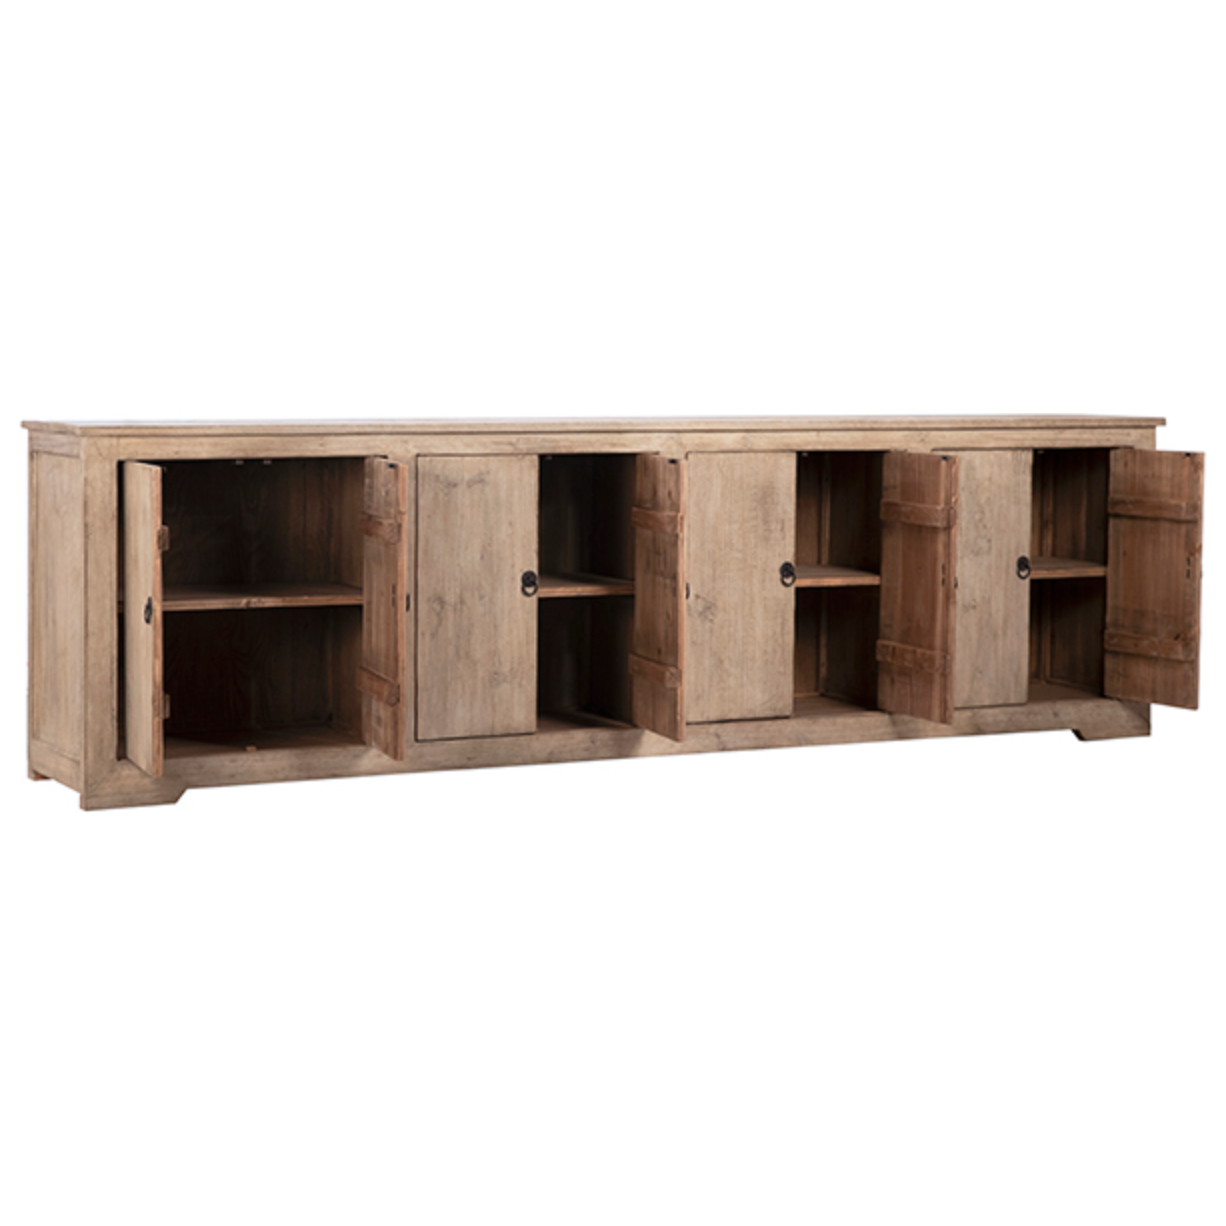 This Nico Sideboard provides ample storage for keeping dinnerware and table linens within easy reach -- a piece that is sure to stand out at every dinner party and holiday meal!